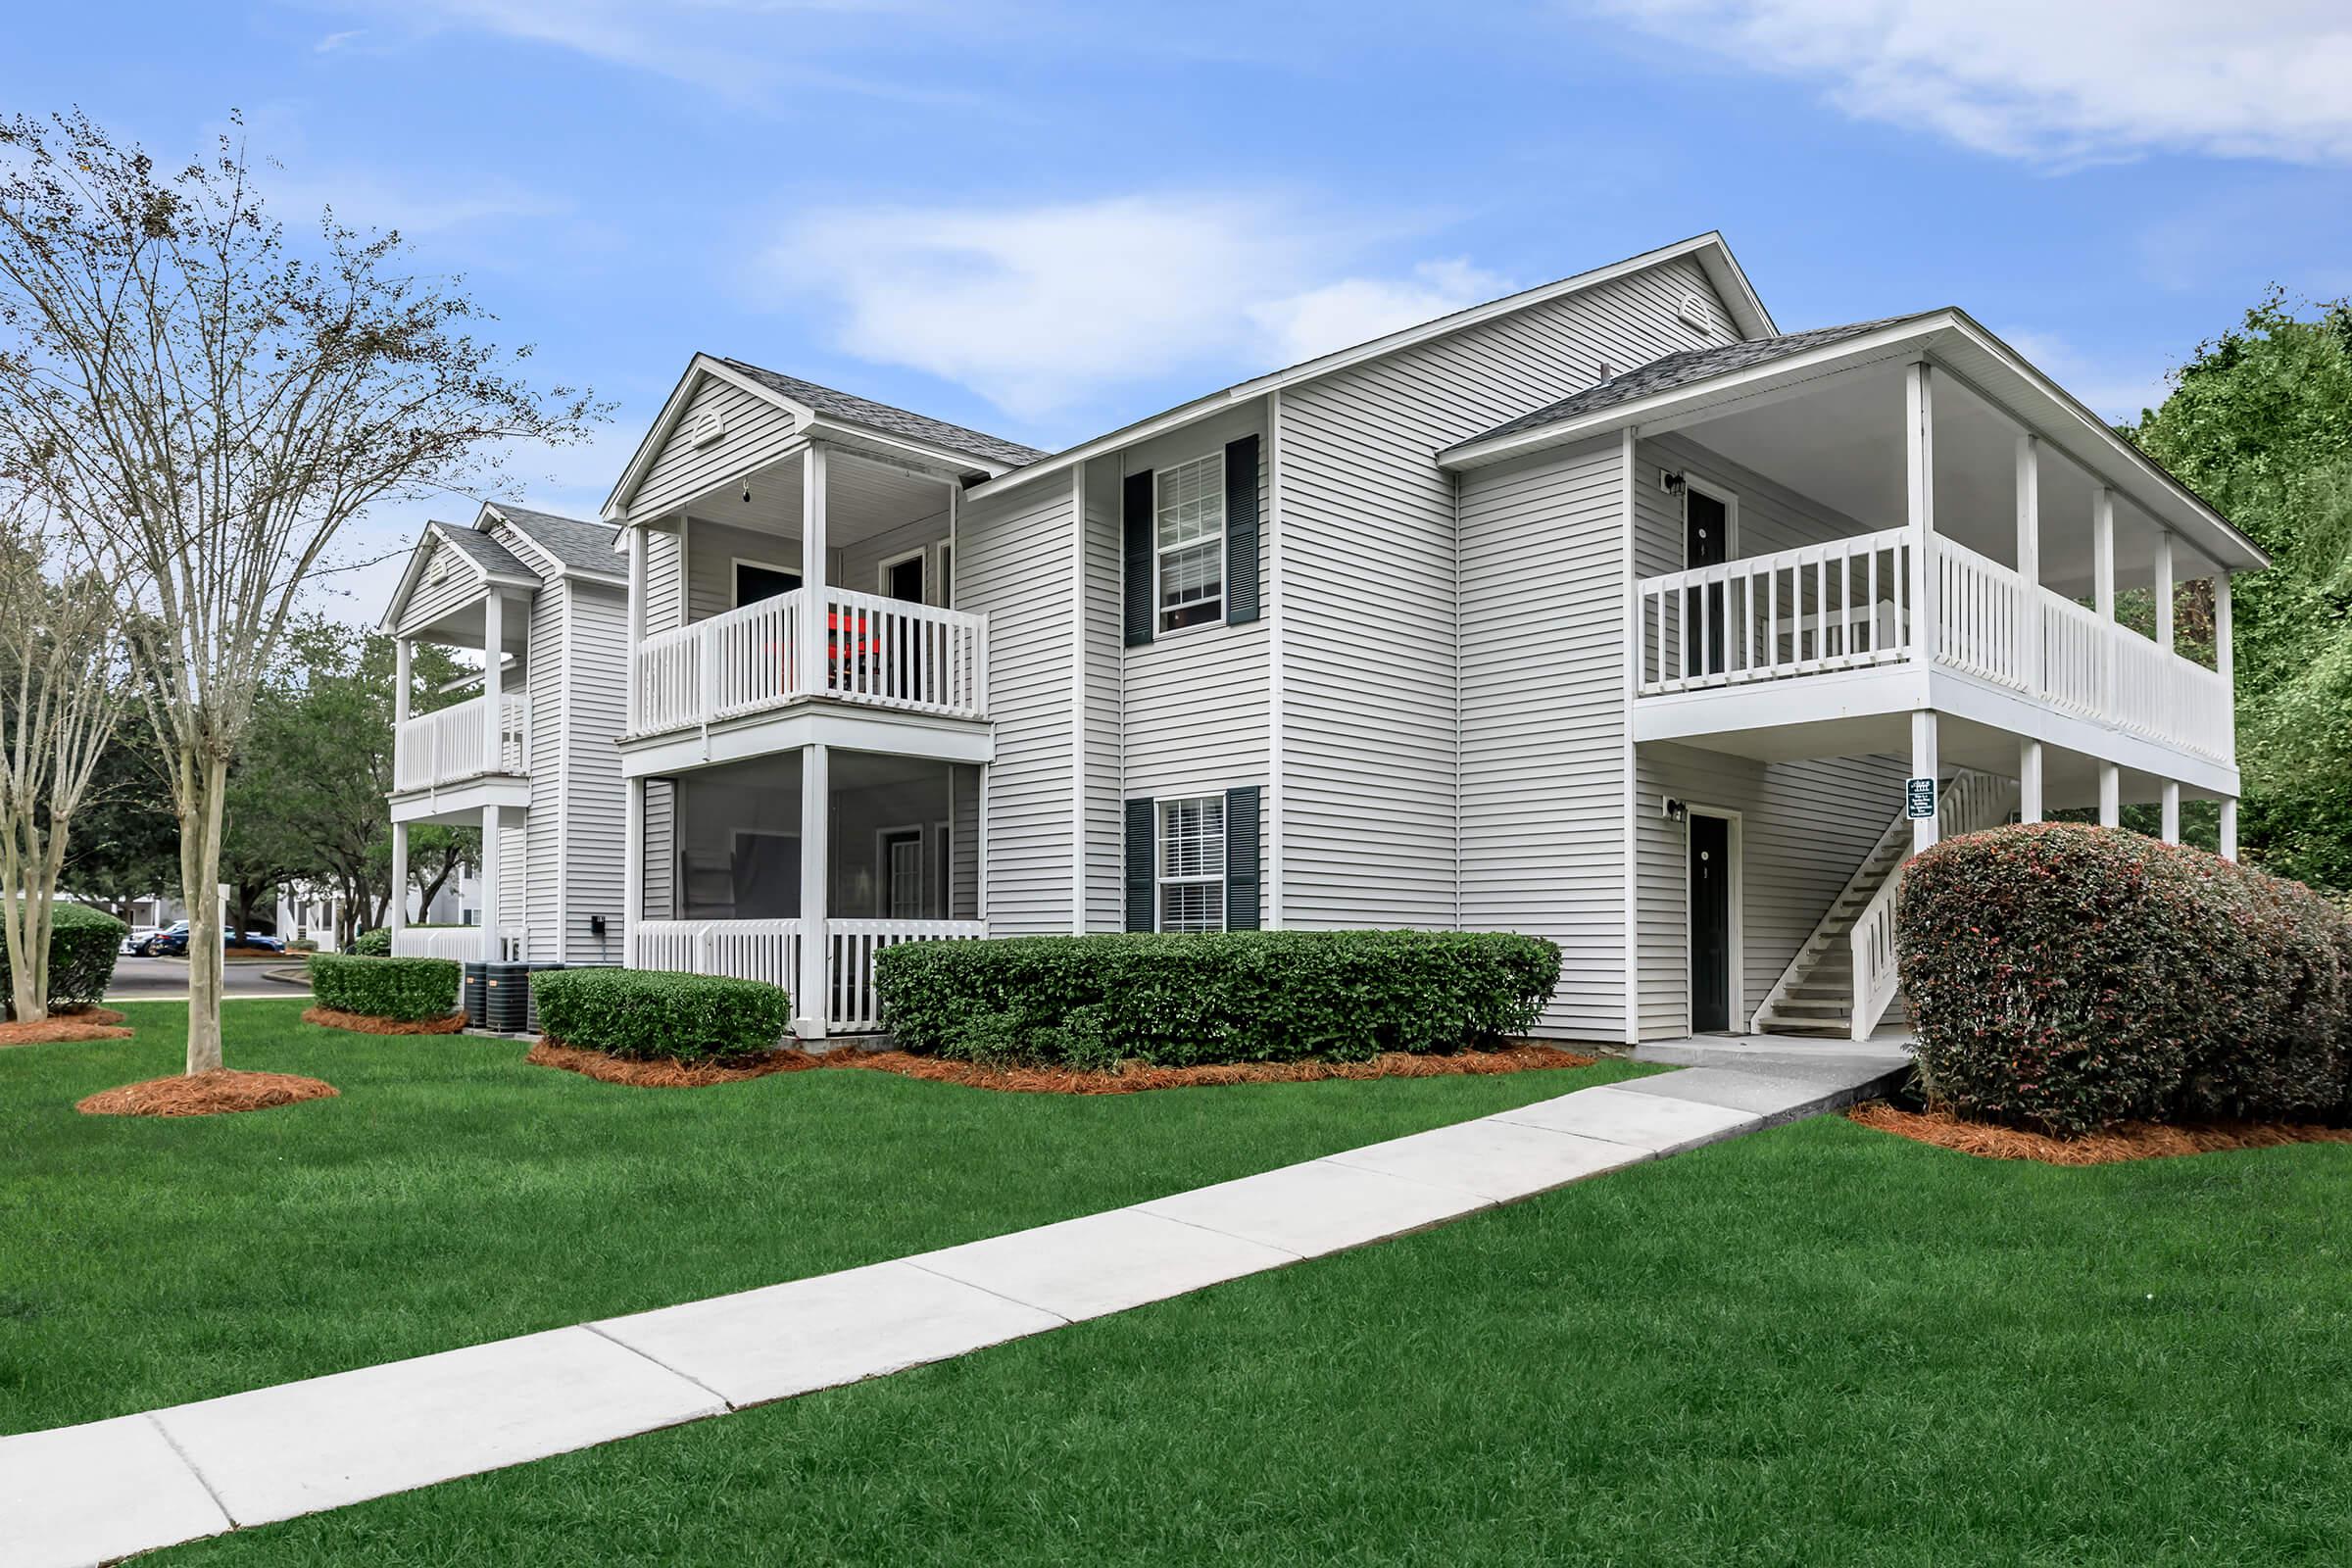 WELCOME HOME TO AZALEA PLACE IN TALLAHASSEE, FL